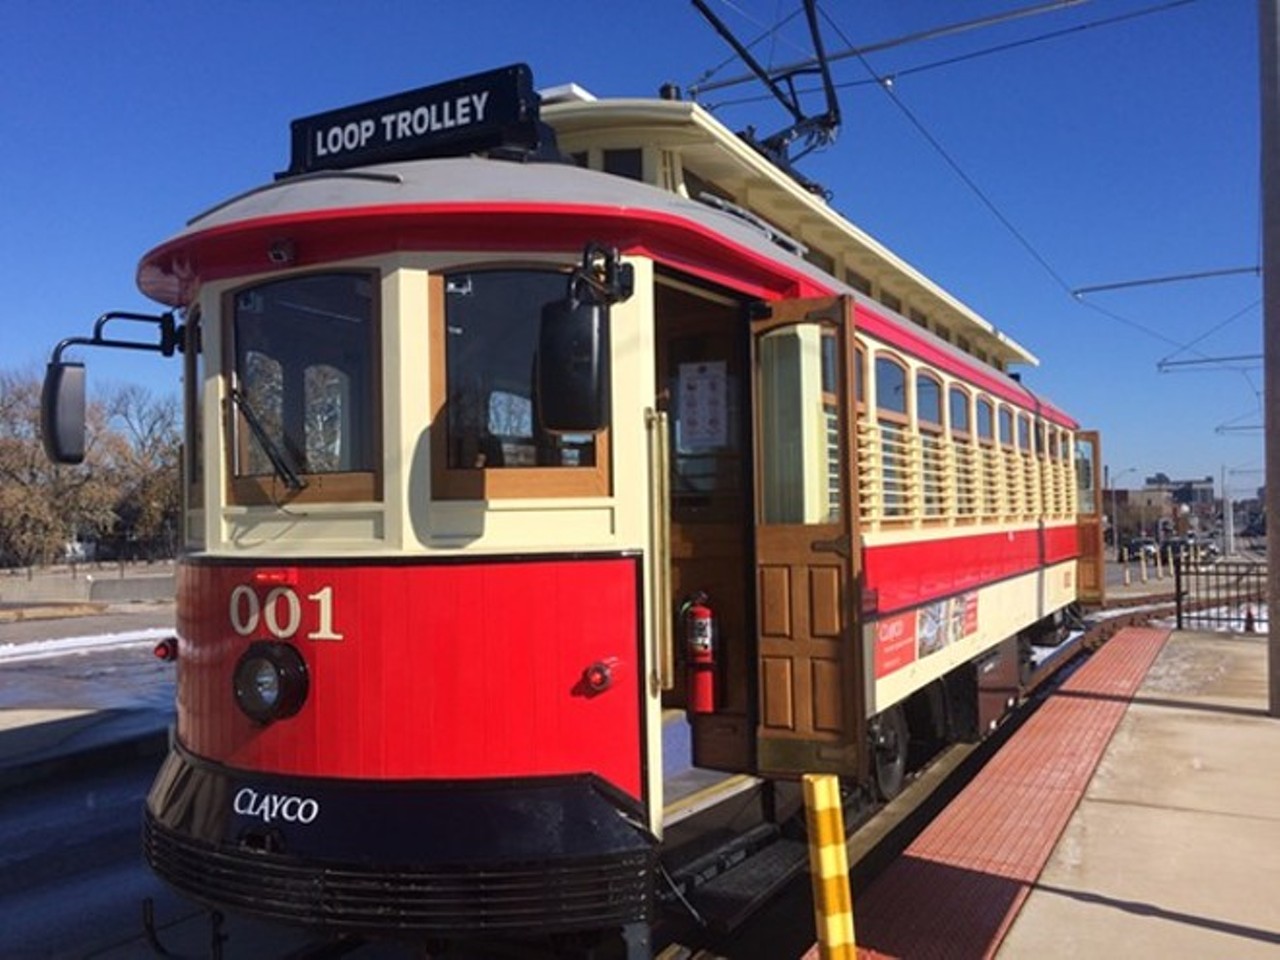  Take a ride on the Loop Trolley when it reopens.